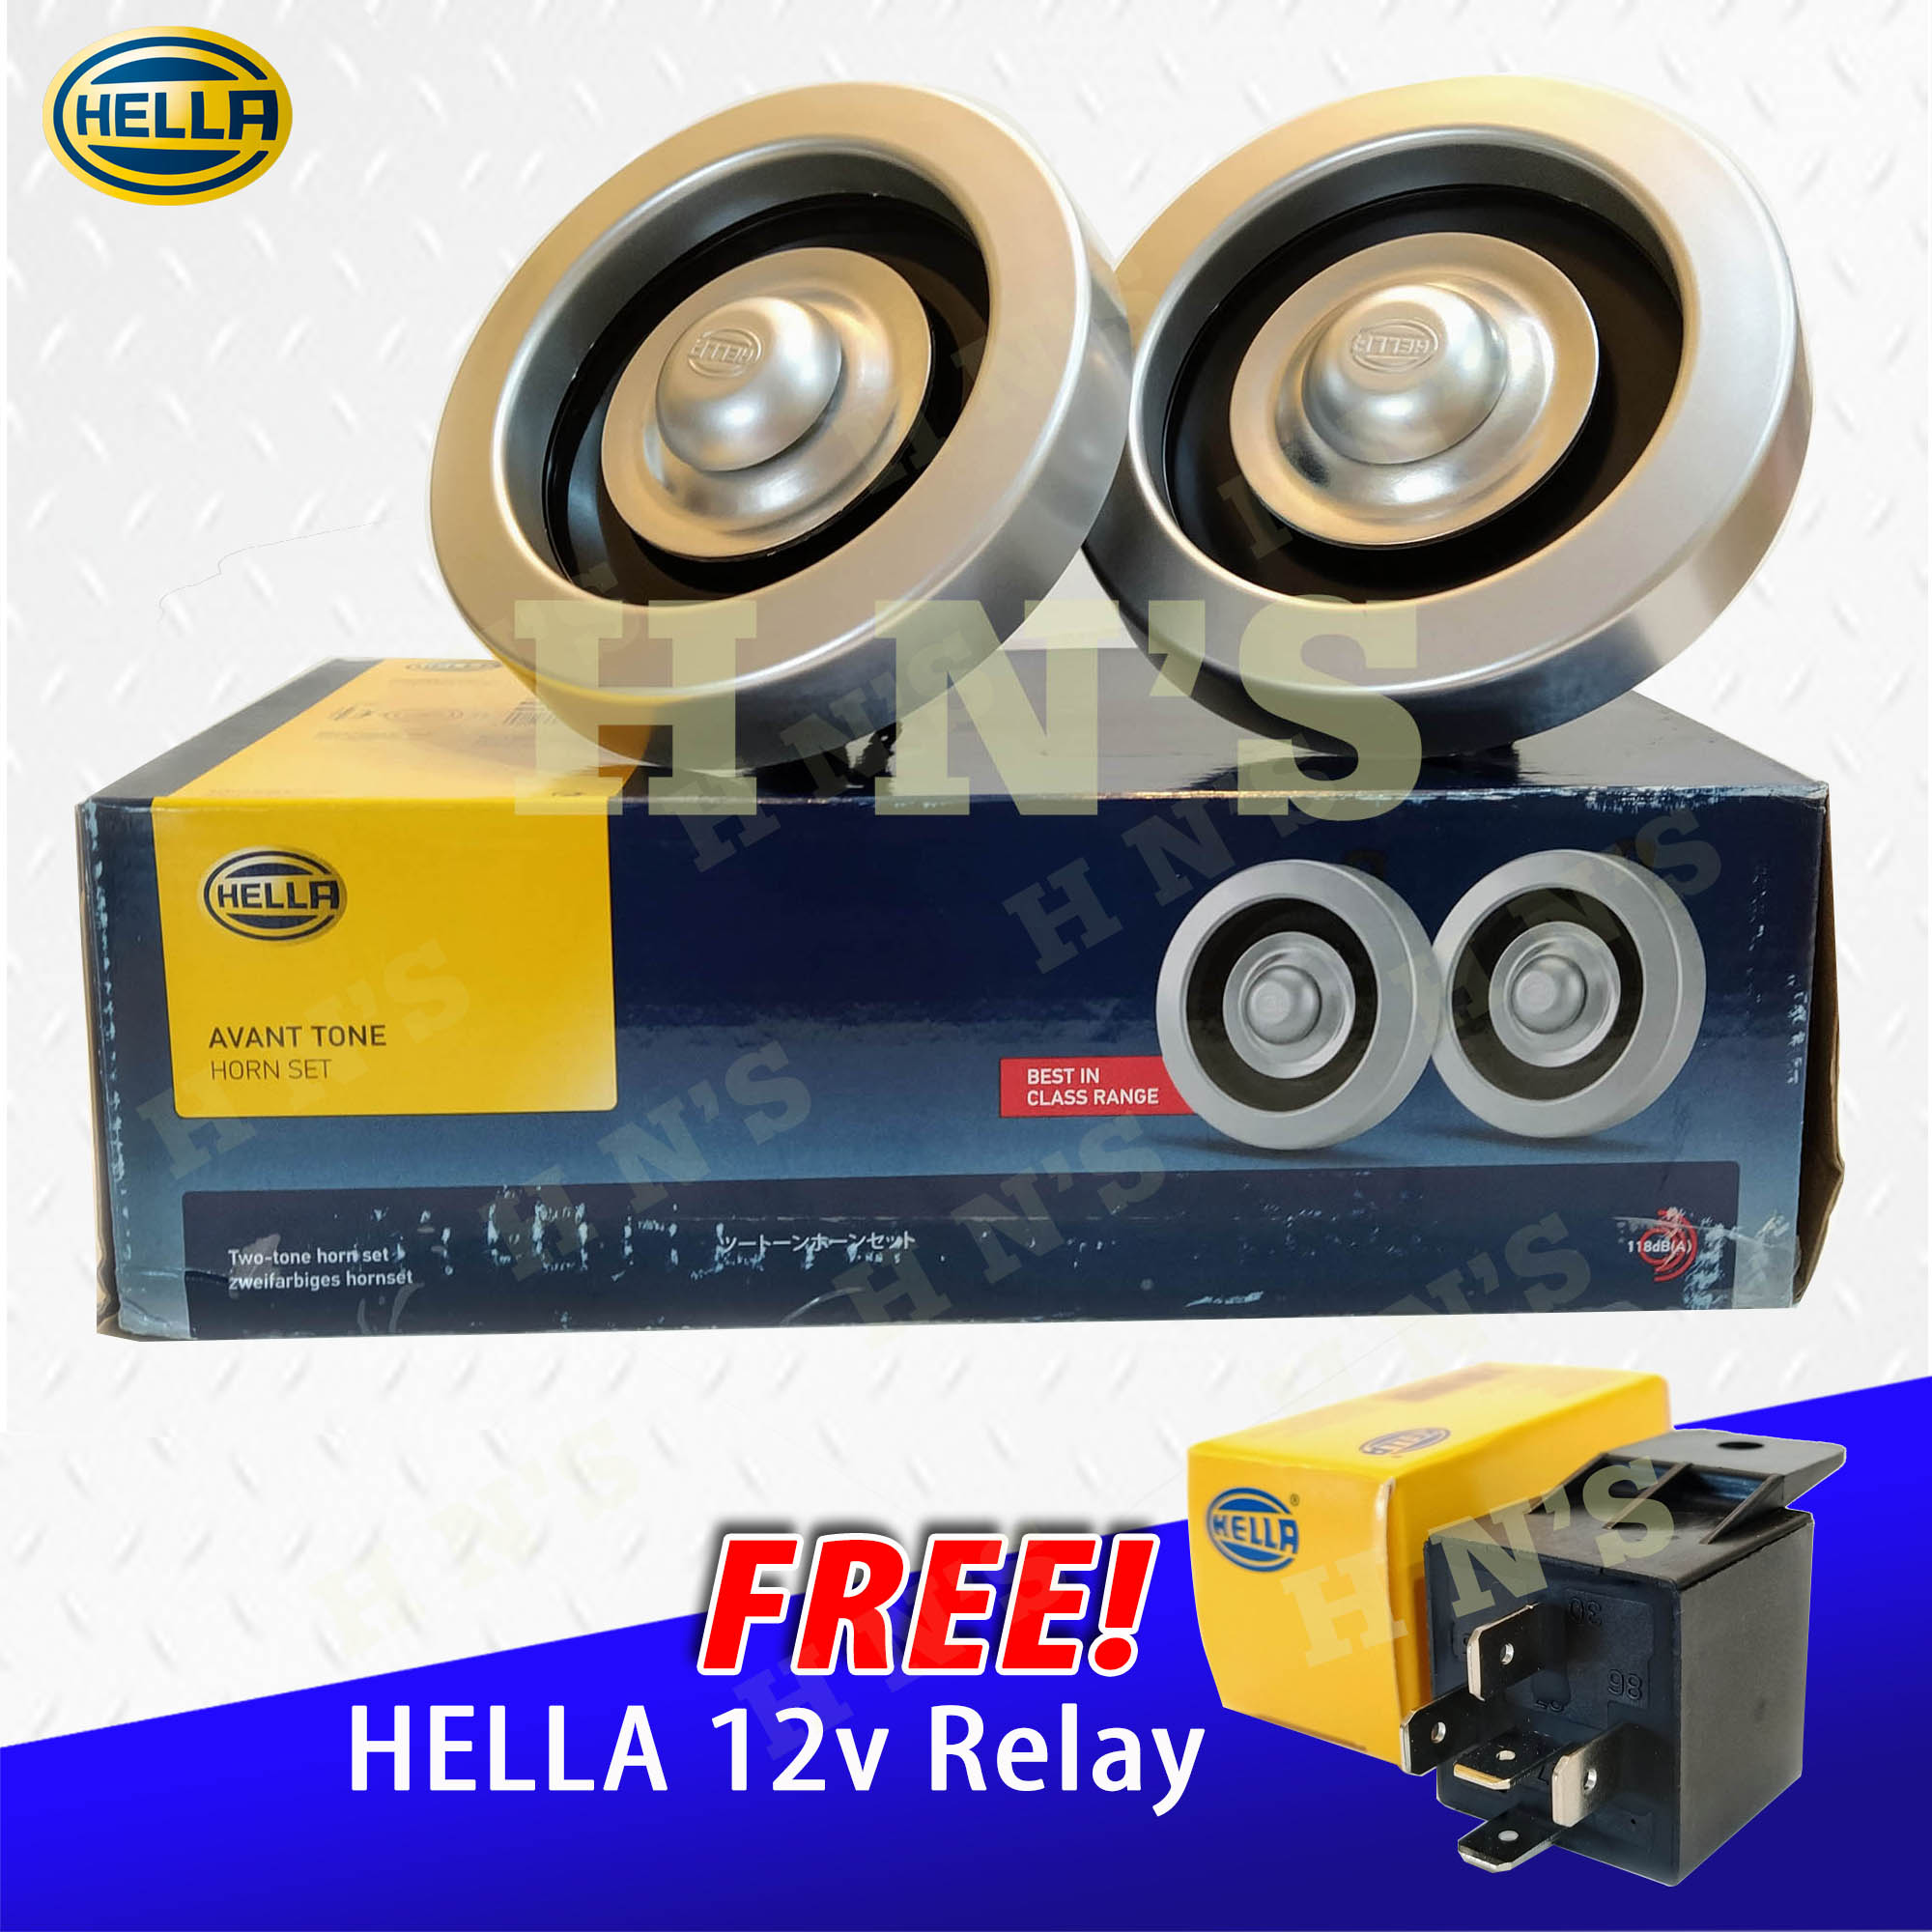 HELLA Avant Tone Horn Set ( Suitable for Cars / SUV / Motorcycles